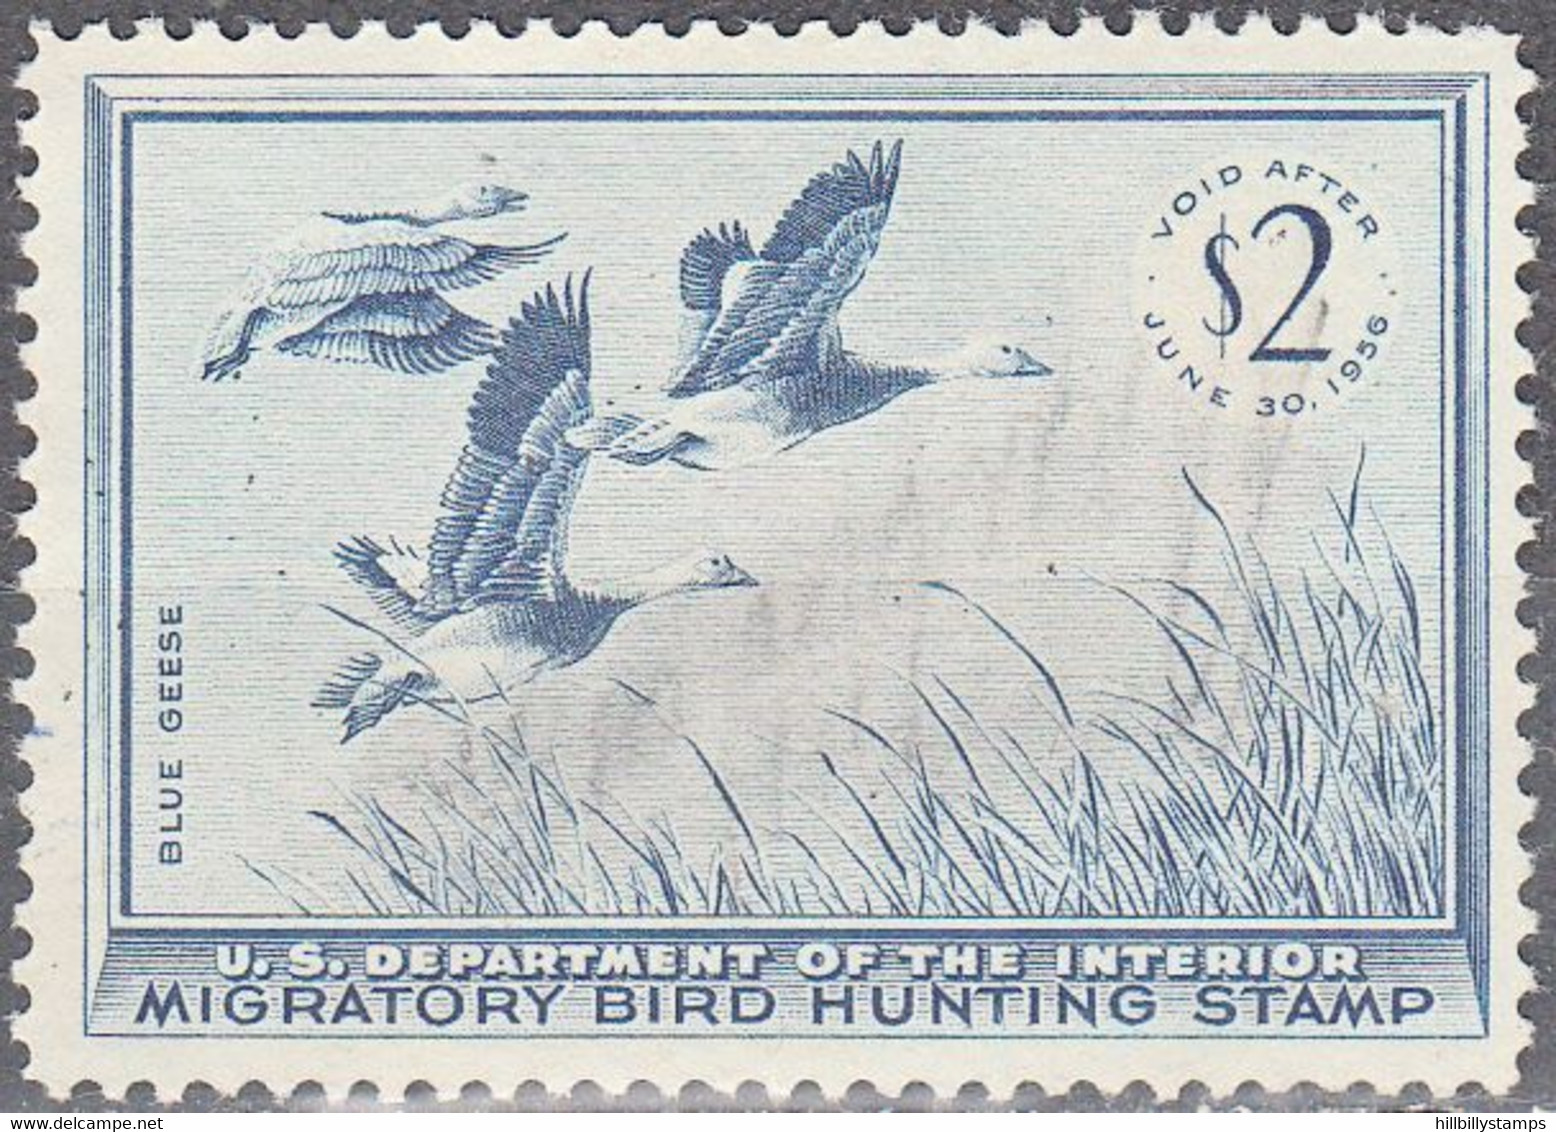 UNITED STATES  SCOTT NO RW22  USED  YEAR  1955 - Duck Stamps